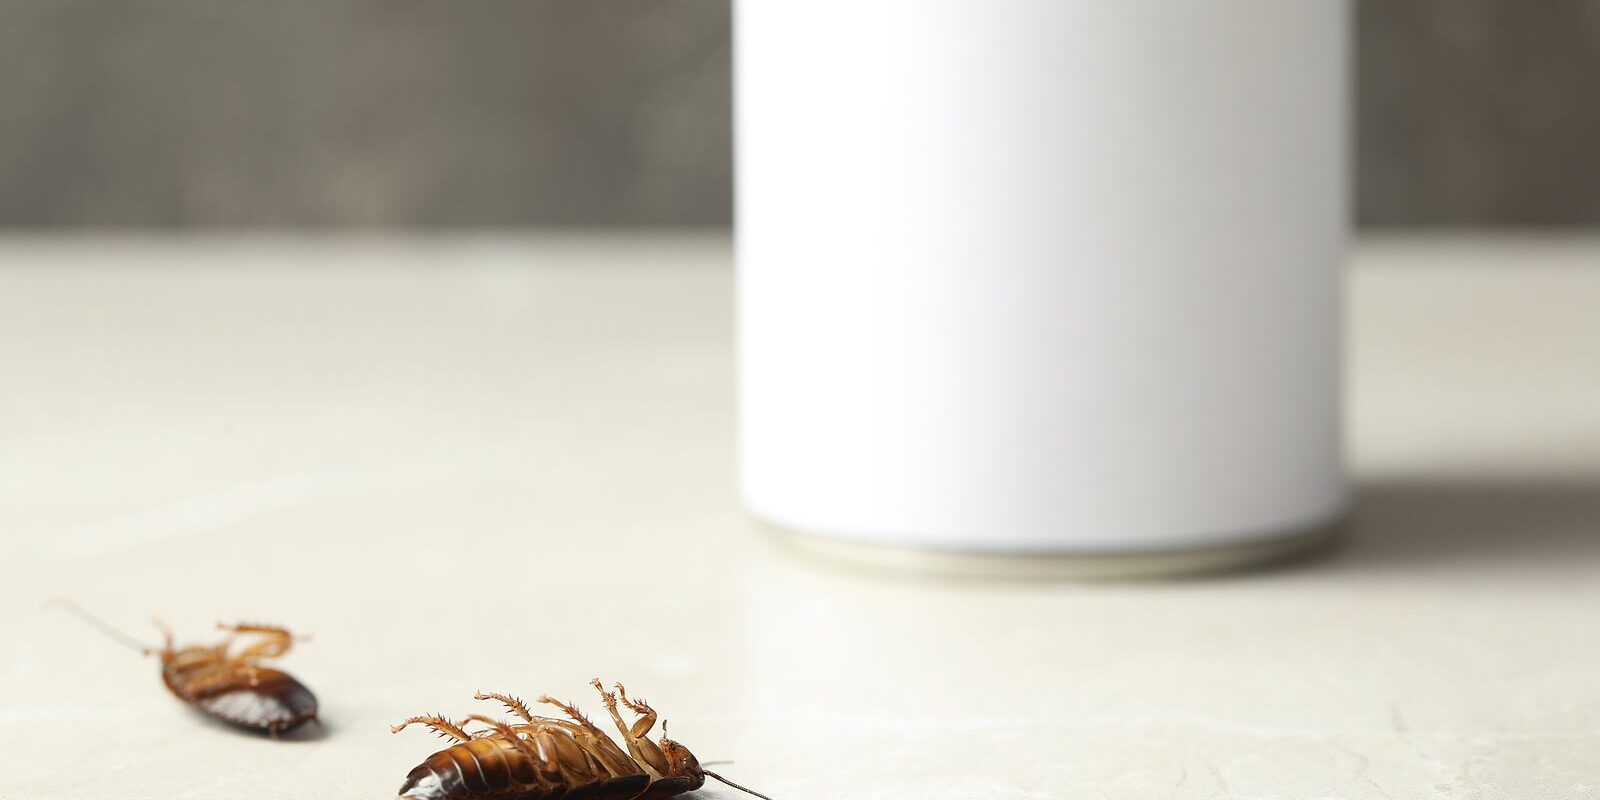 bigstock-Dead-Brown-Cockroaches-On-Ligh-377512891 (1)